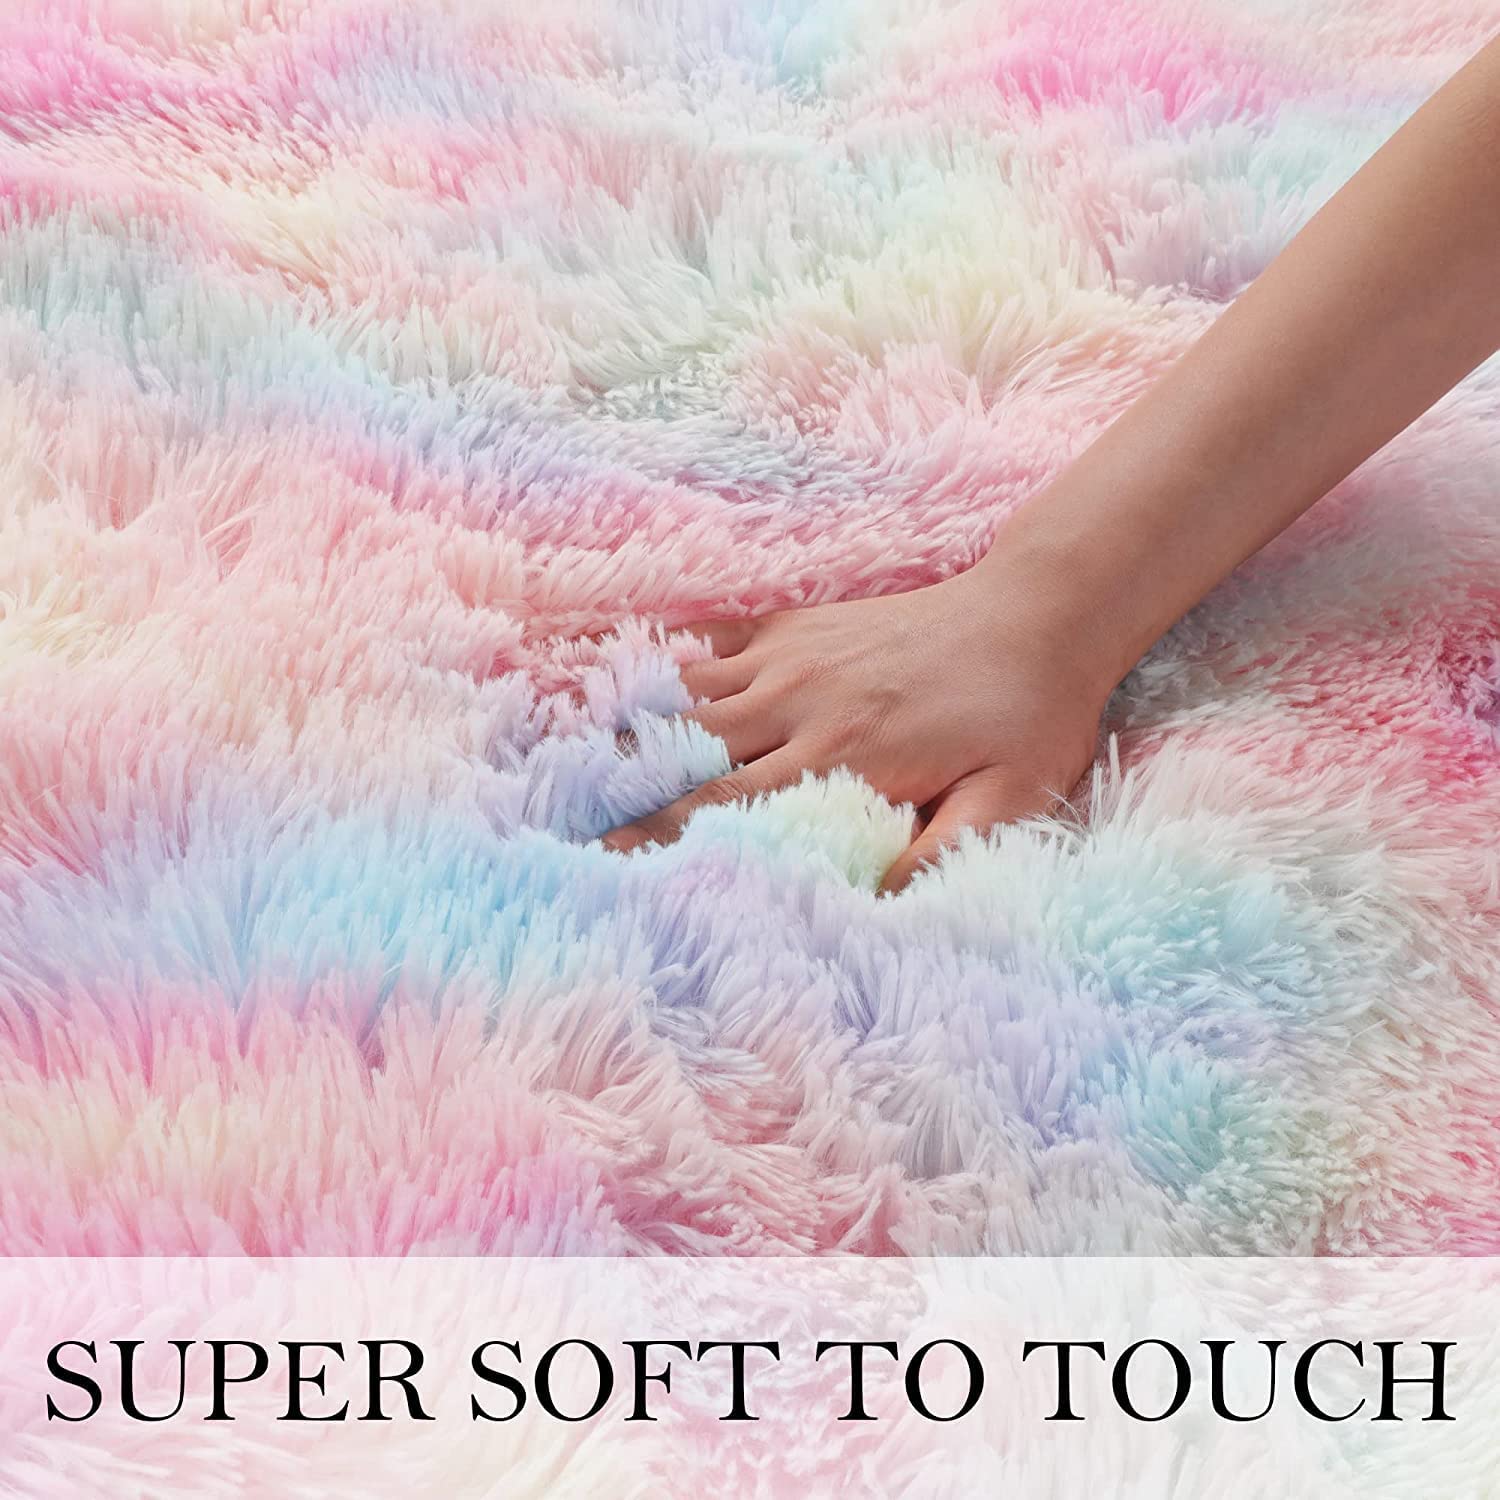 Junovo Soft Rainbow Area Rugs for Girls Room, Fluffy Colorful Rugs Cute Floor Carpets Shaggy Playing Mat for Kids Baby Girls Bedroom Nursery Room, 4'x6',Rainbow - image 5 of 8